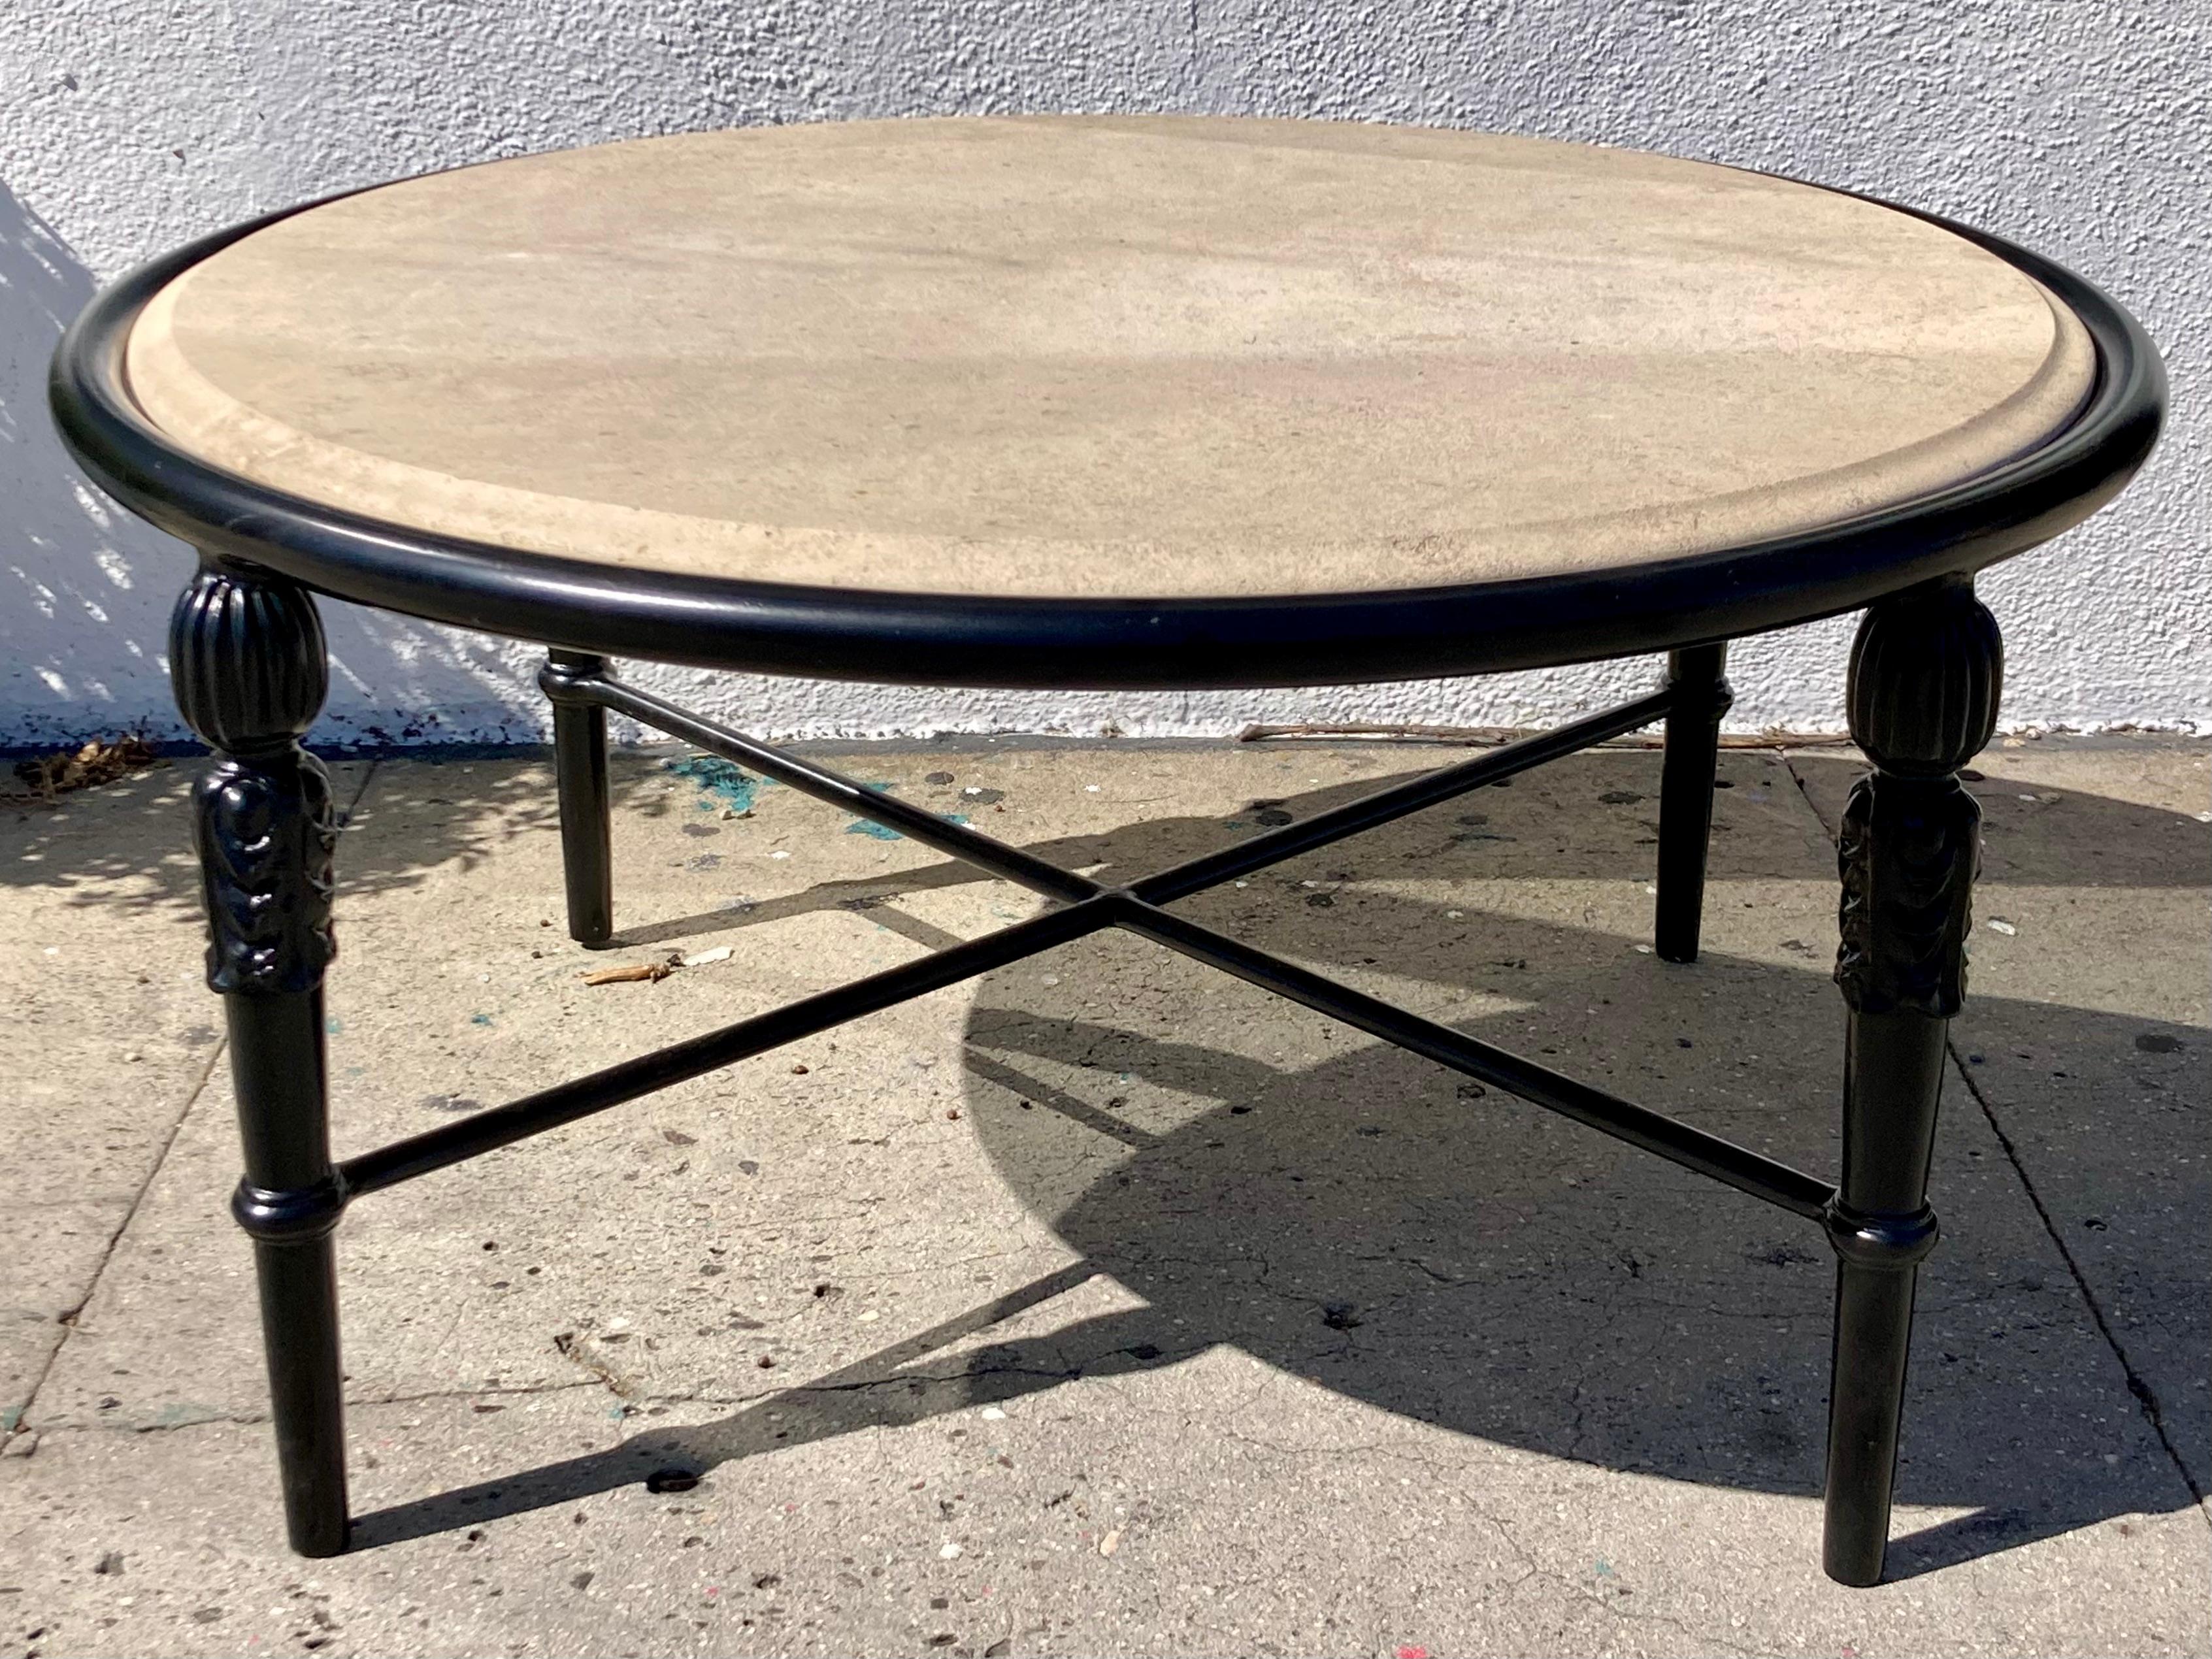 Michael Taylor Montecito Round Patio Coffee Table With Stone Top In Good Condition For Sale In Los Angeles, CA